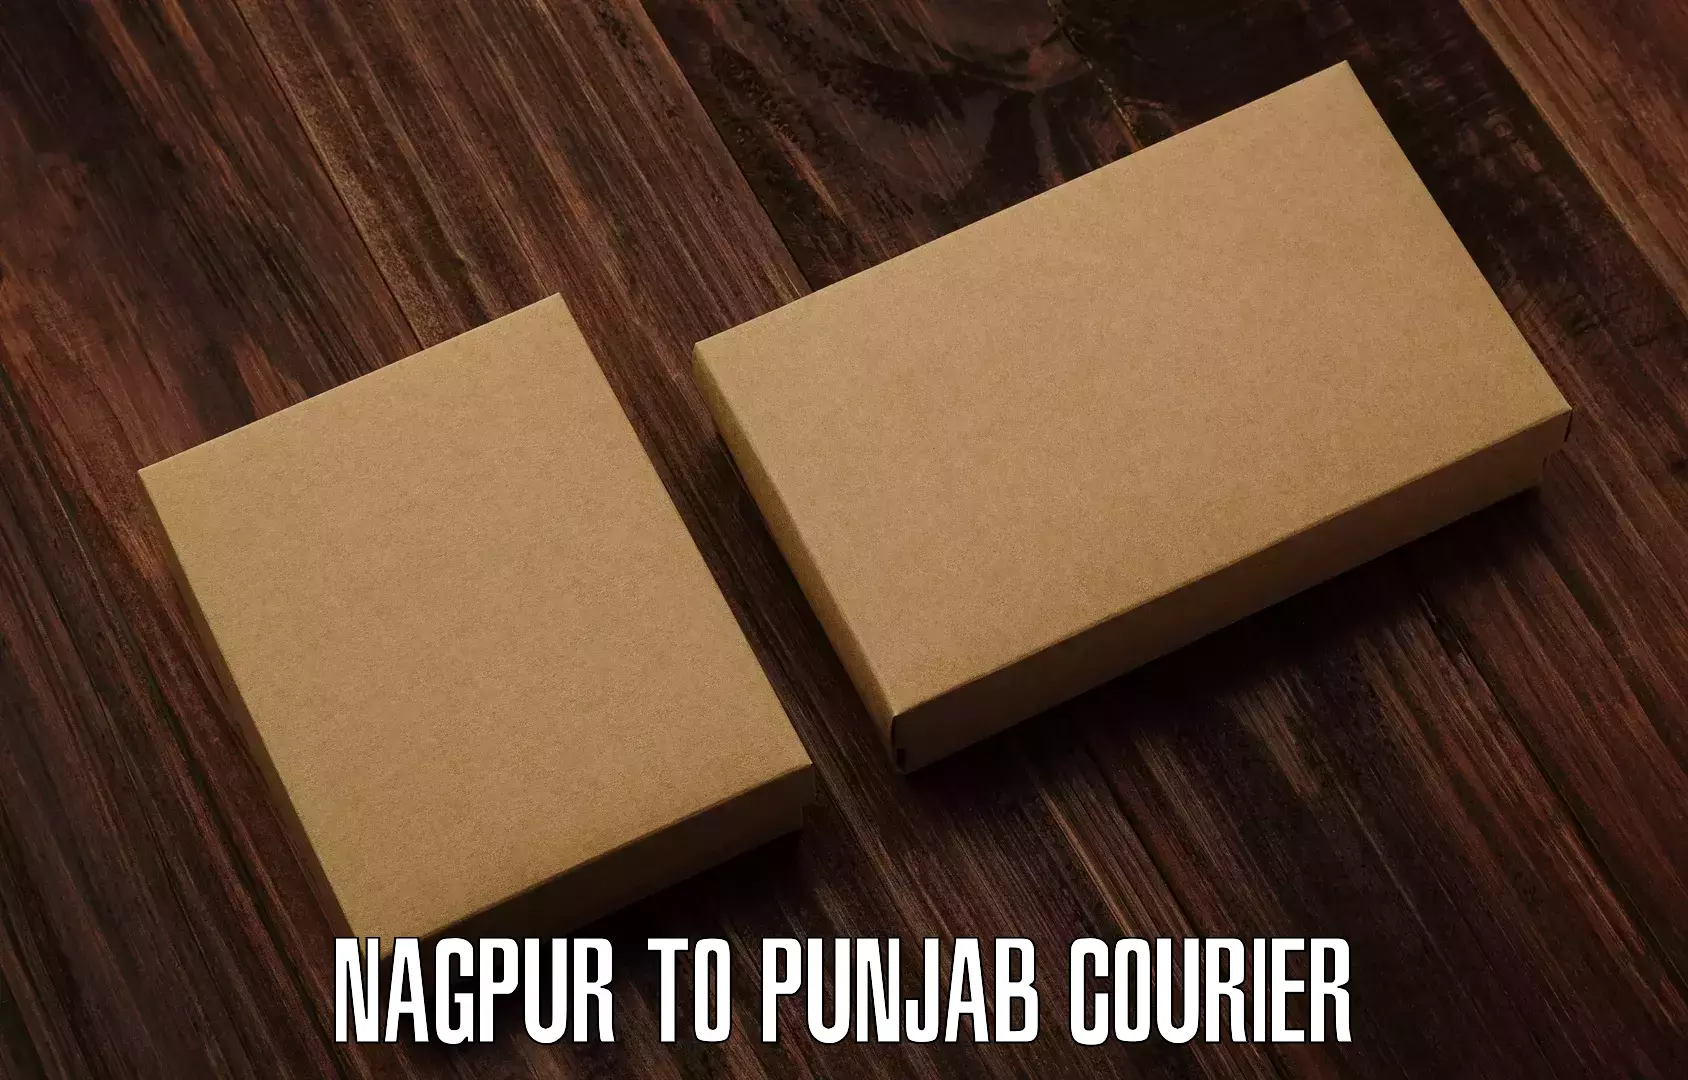 Flexible delivery schedules Nagpur to Amritsar